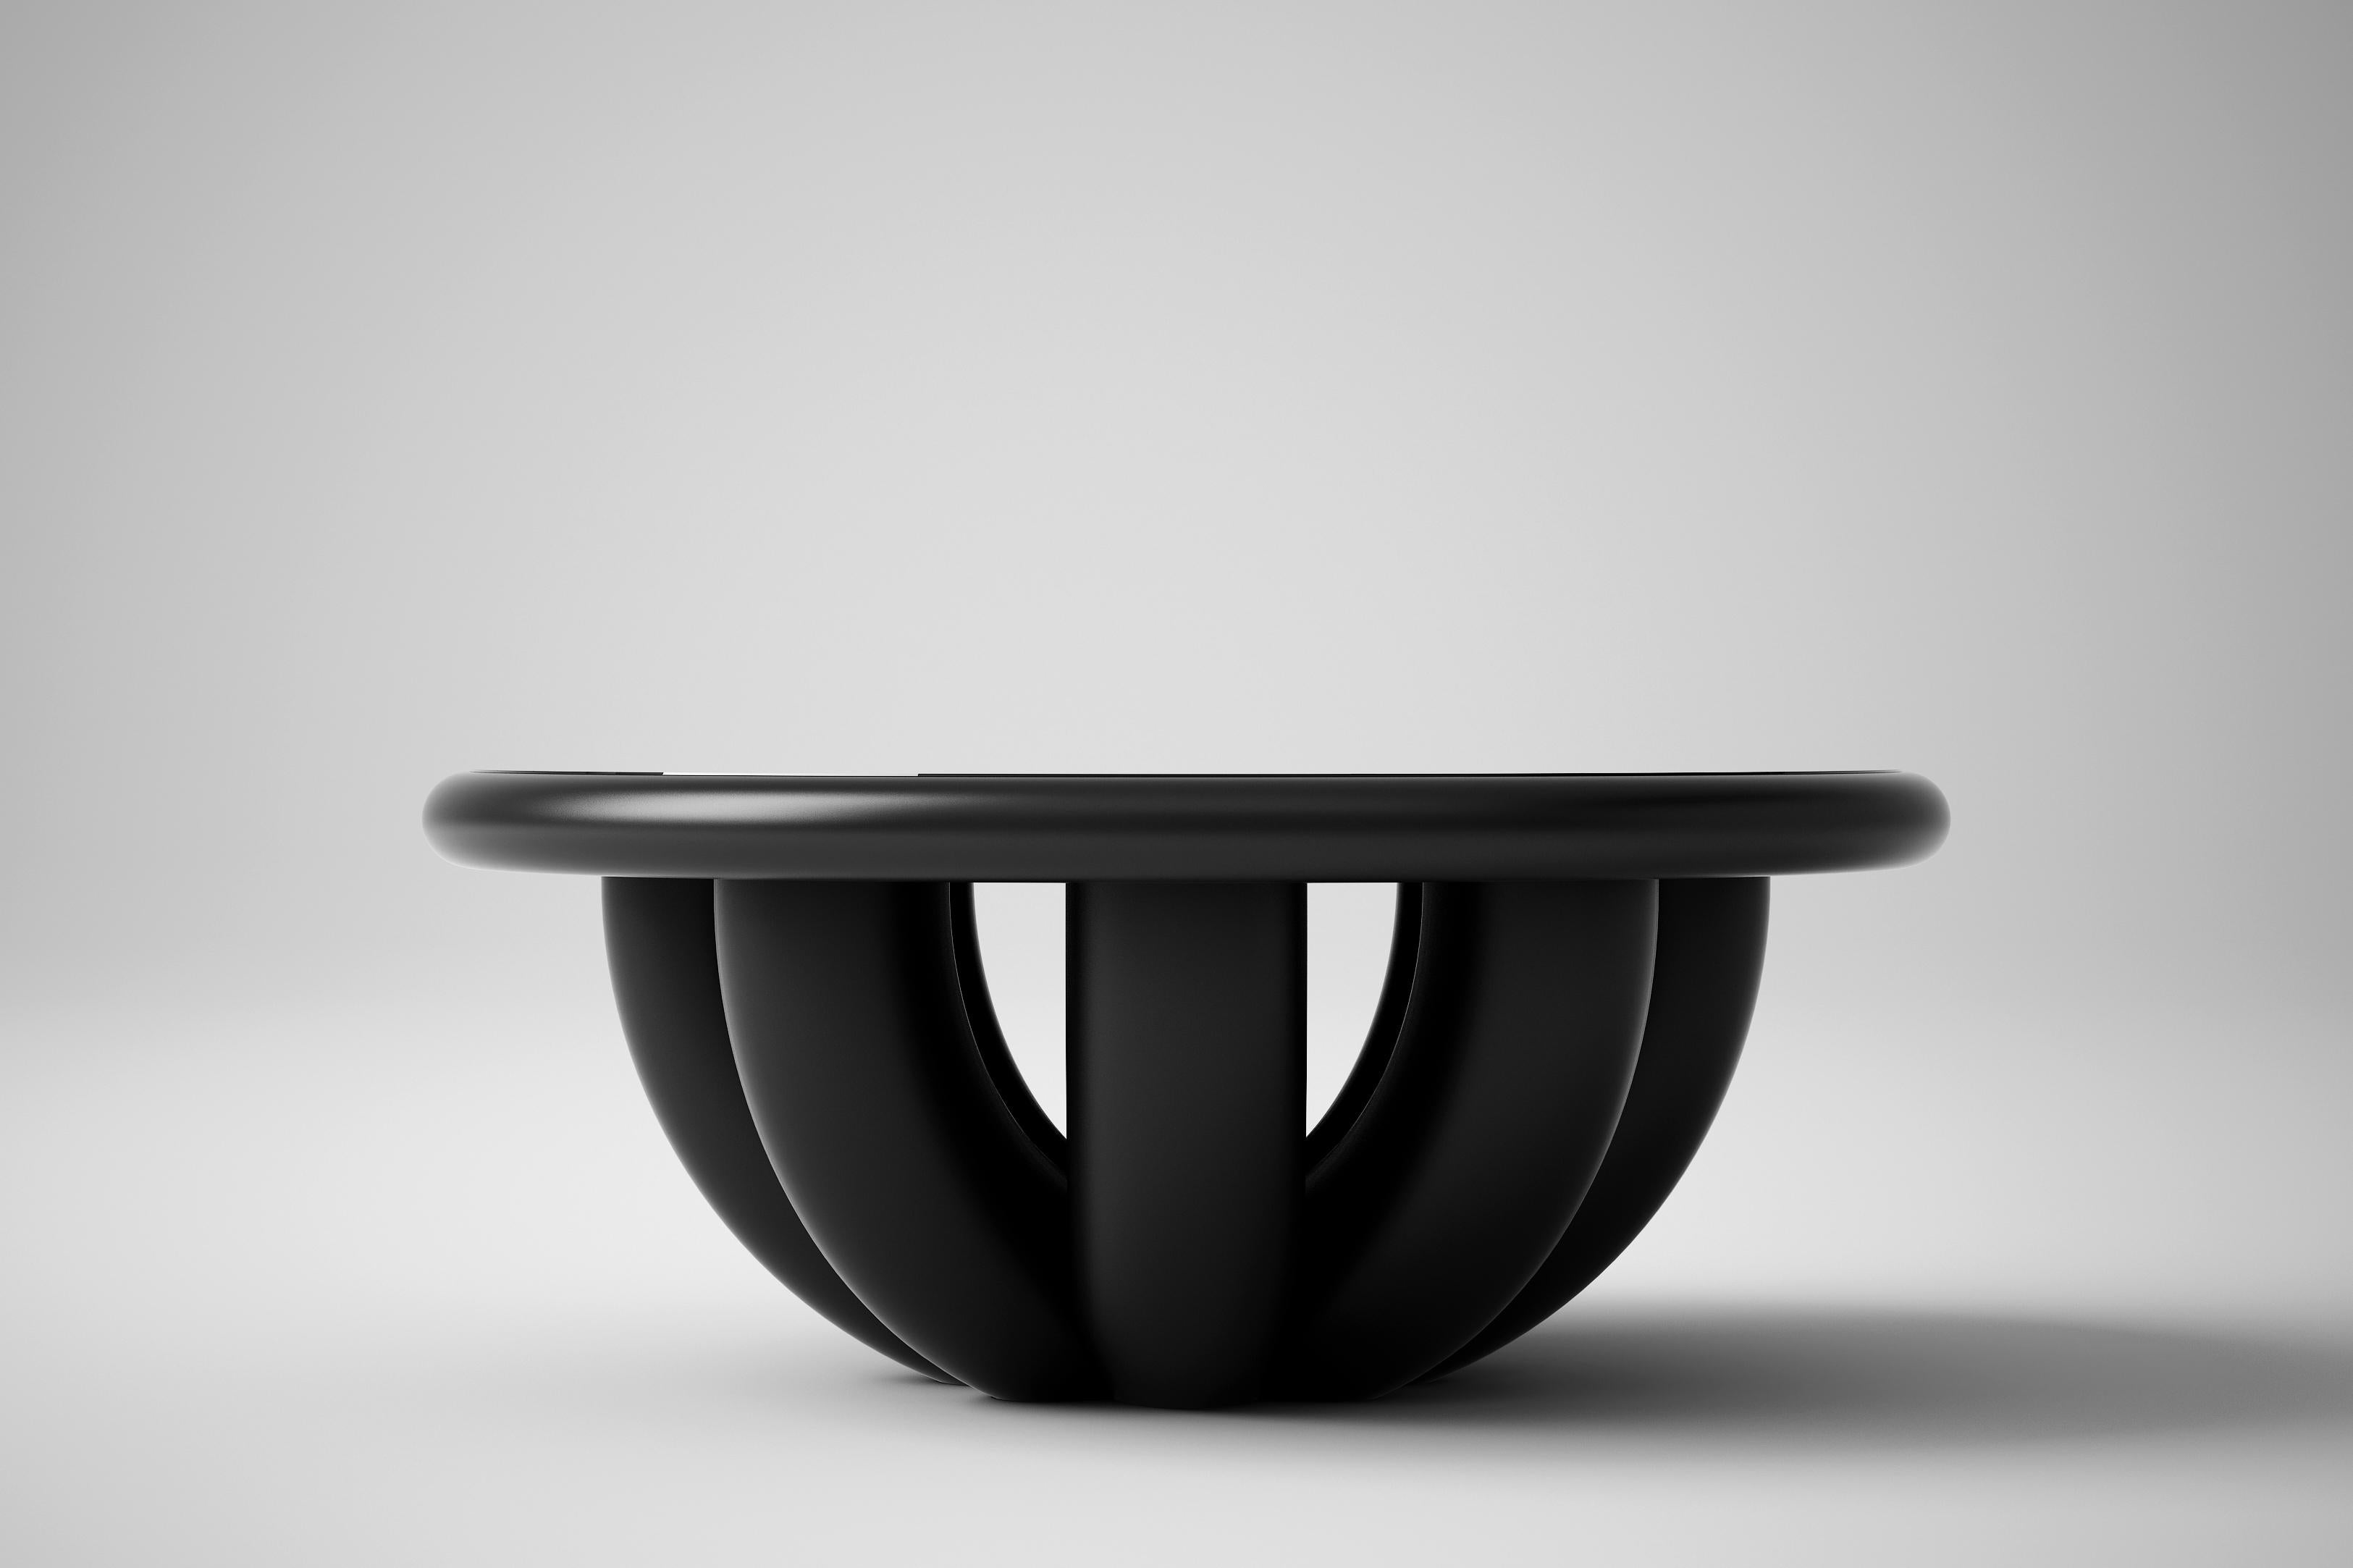 Bold low table by Tolga Sencer
Dimensions: 35 x 35 x 85 cm
Materials: black lacquer wood, black glass over wood top

In Bold Collection, bodies have strong symmetrical structures. Rotations of thick and broad elliptic lines on a single axis